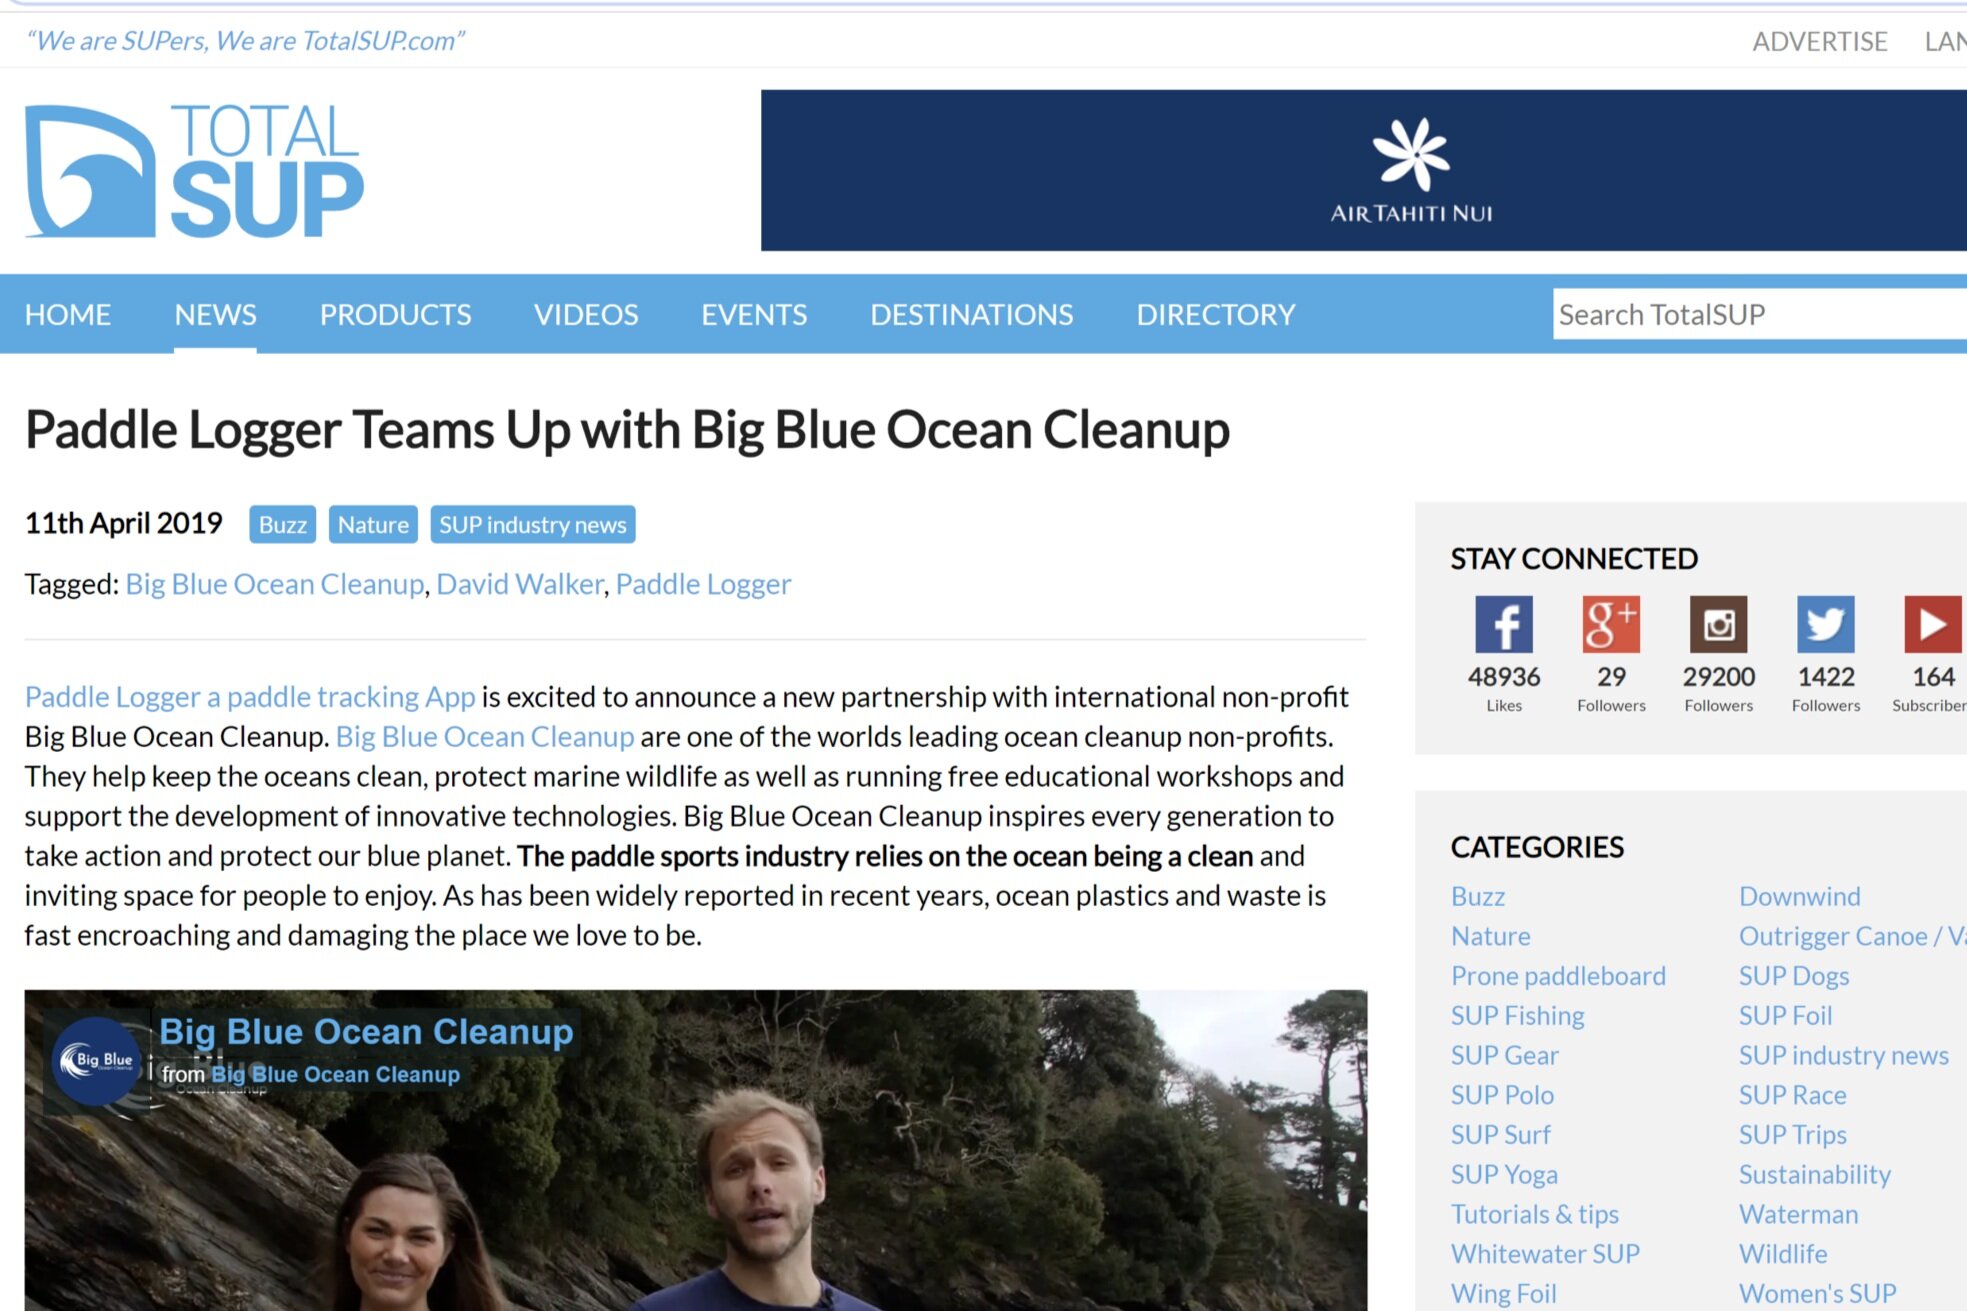 Ride+on+Retreats+supporting+the+Big+Blue+Ocean+Cleanup%21+%E2%80%94+Ride+on+Retreats+-+Google+Chrome+03_05_2020+15_03_48.jpg